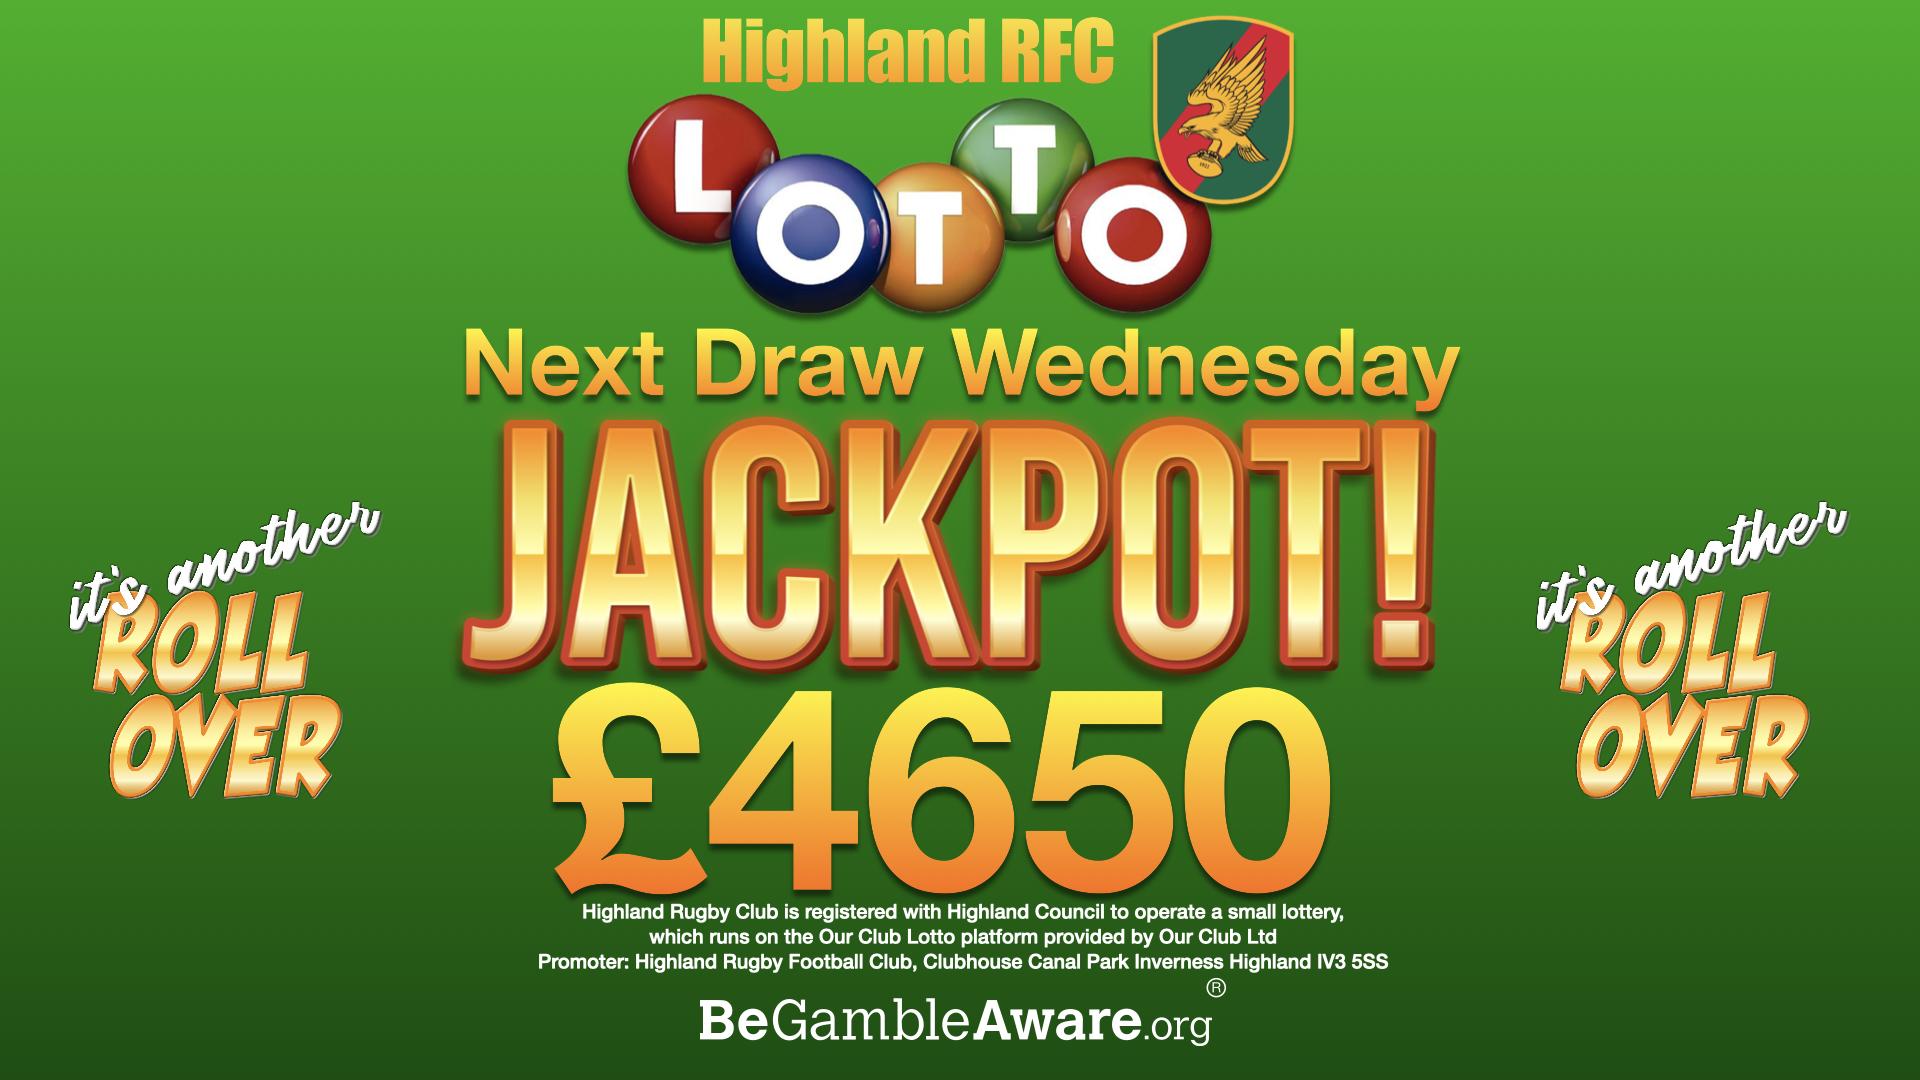 The picture shows the the jackpot for the next Highland rugby Lotto Draw on the 28th January 2023 now stands at £4650